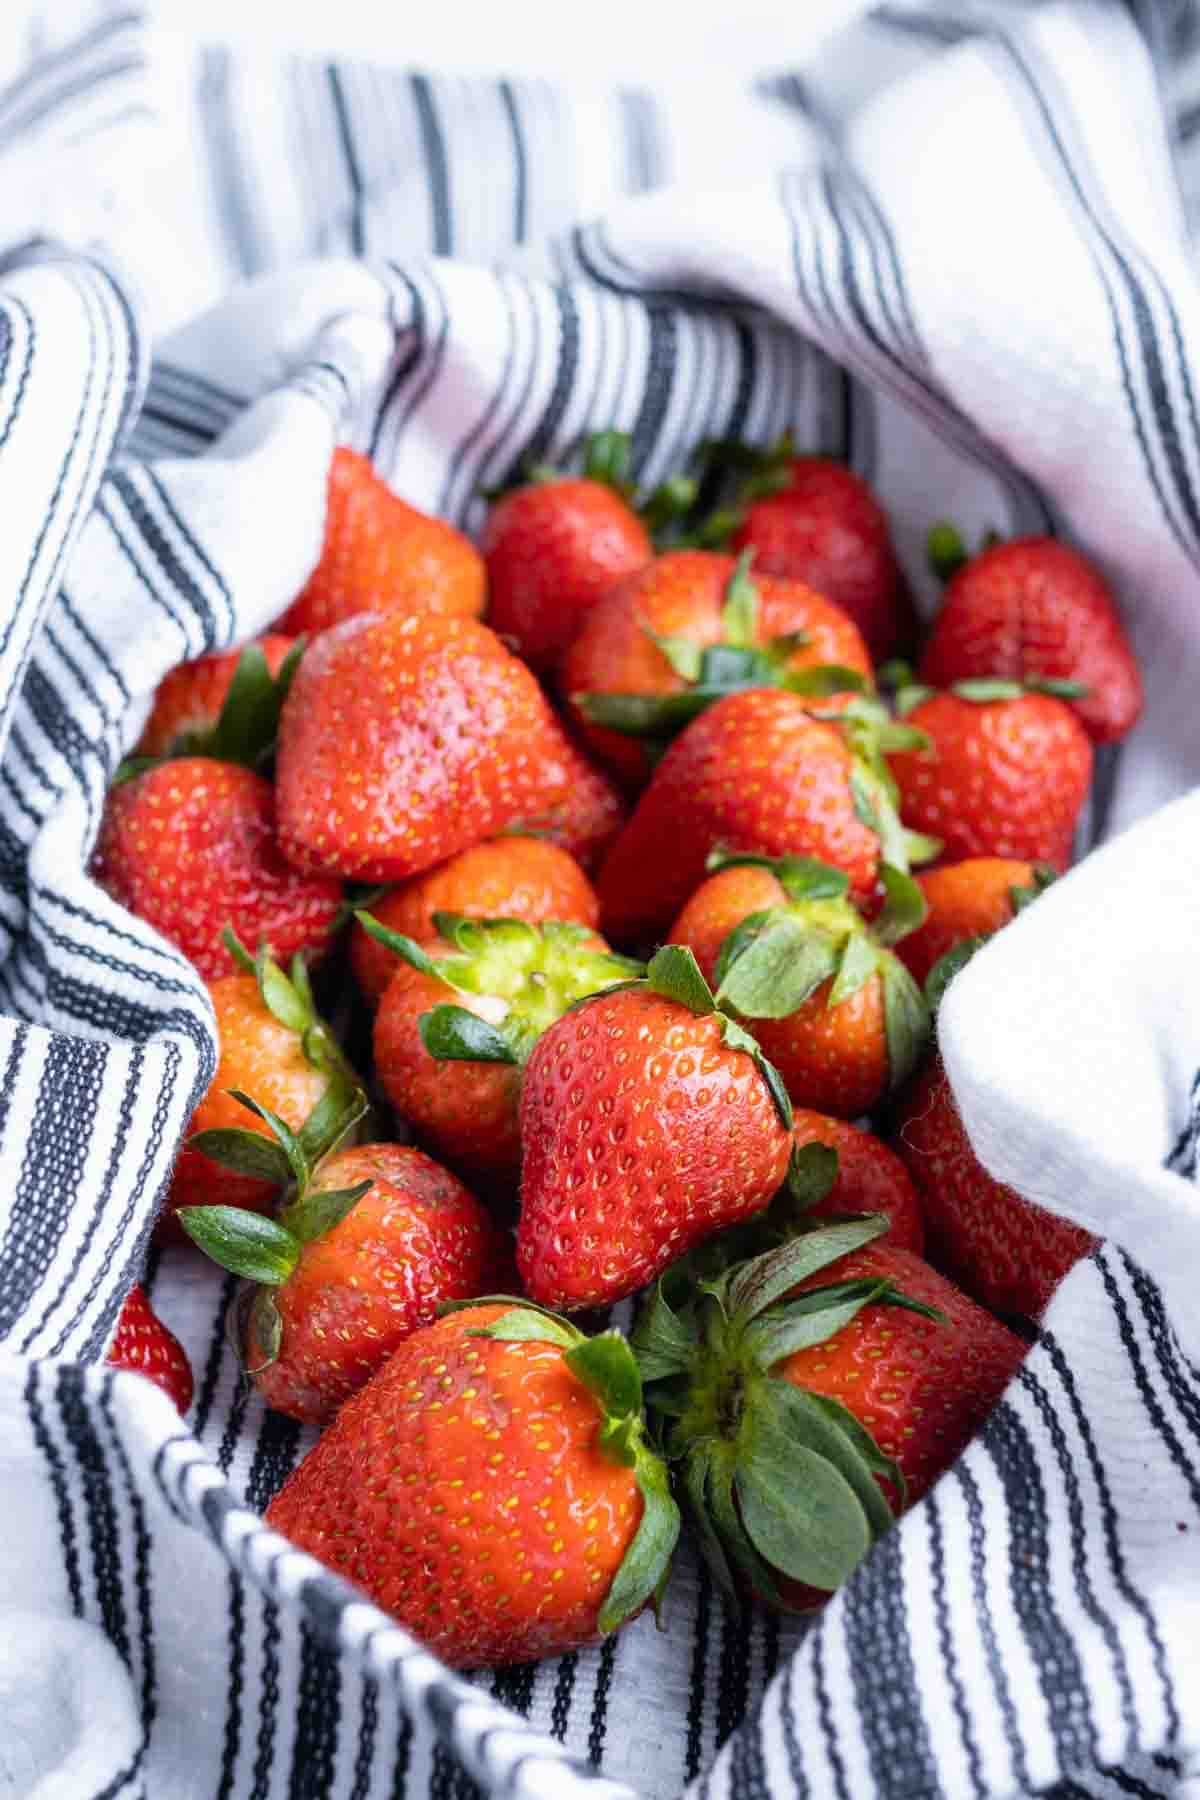 Strawberries are shown in a towel after washing them.